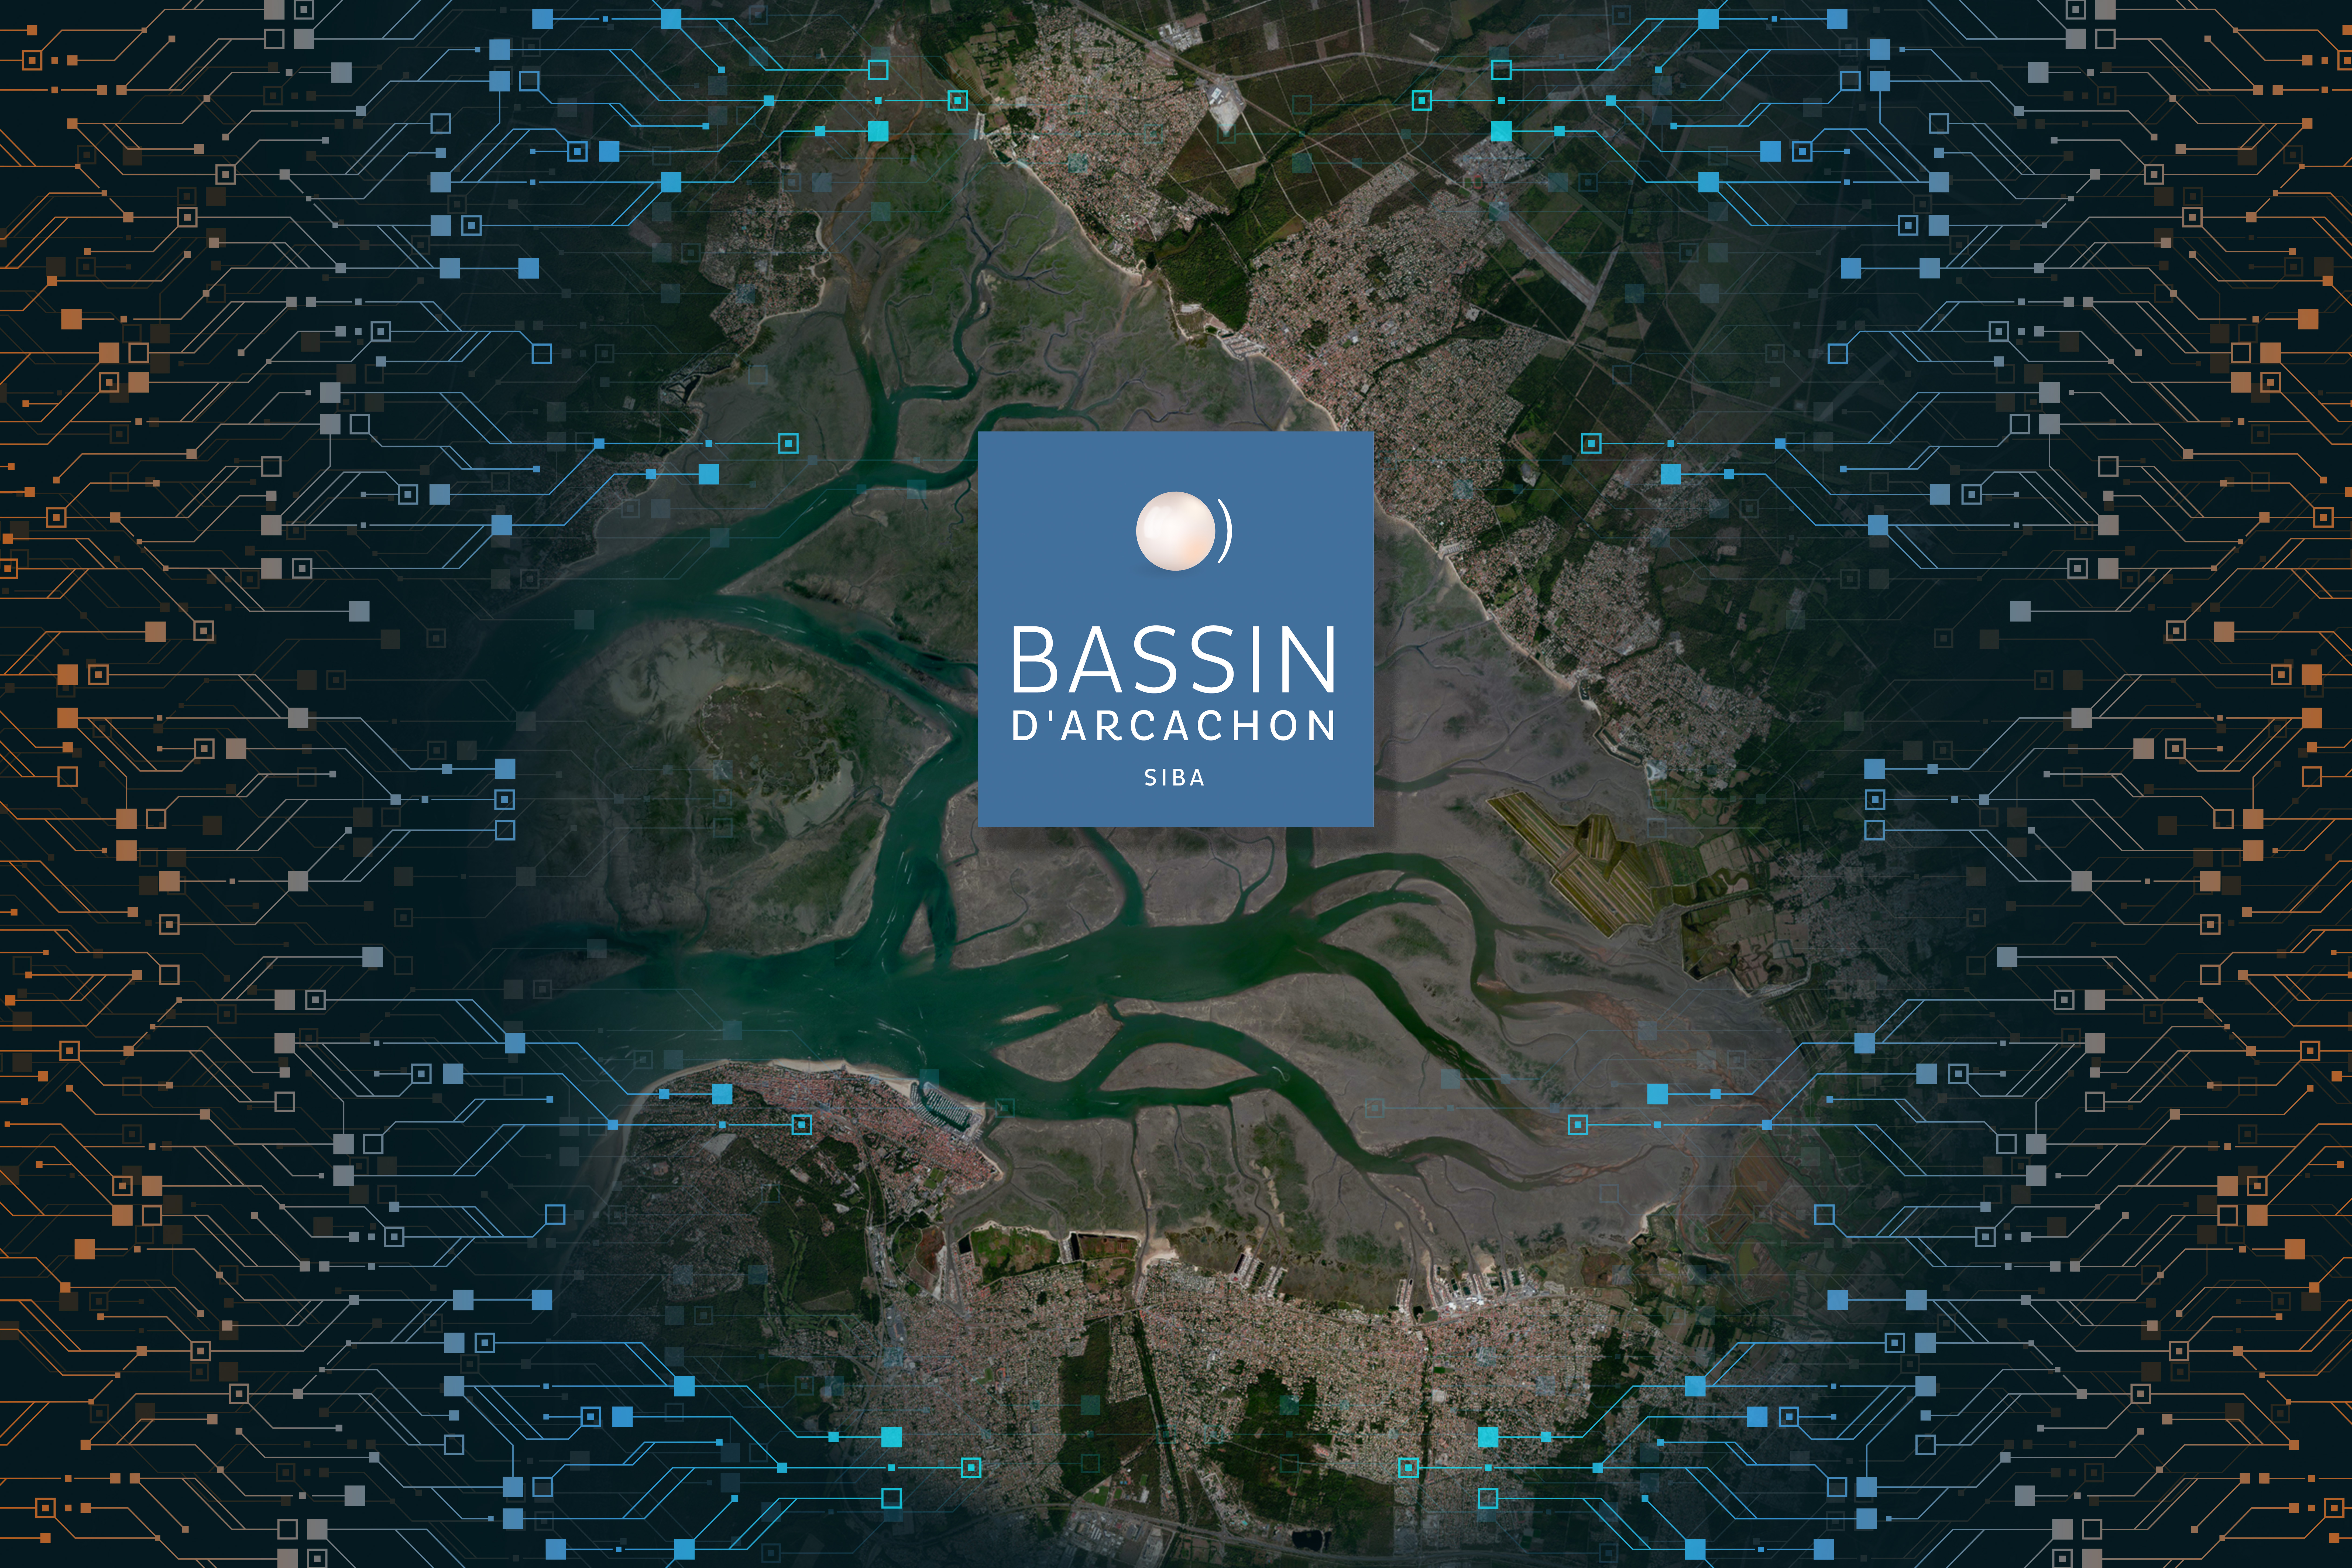 Satellite Image of the Bassin d'Arcachon with SIBA logo